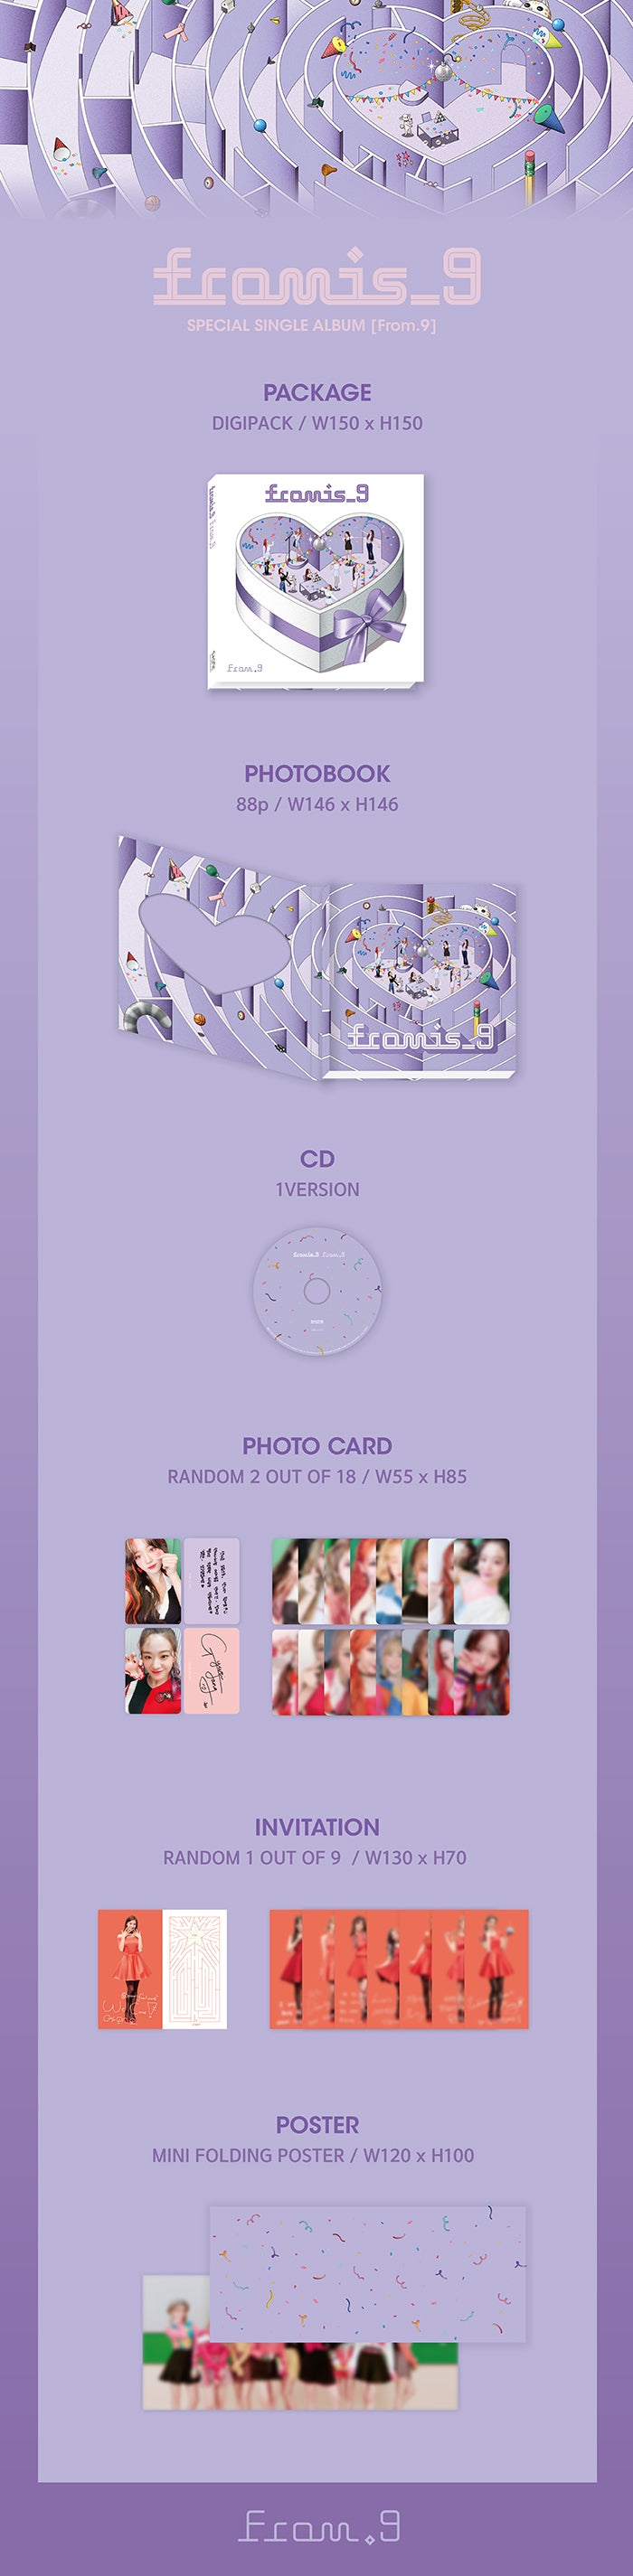 1 CD
1 Posteron
1 Photo Book (88 pages)
2 Cards
1 Inviataion